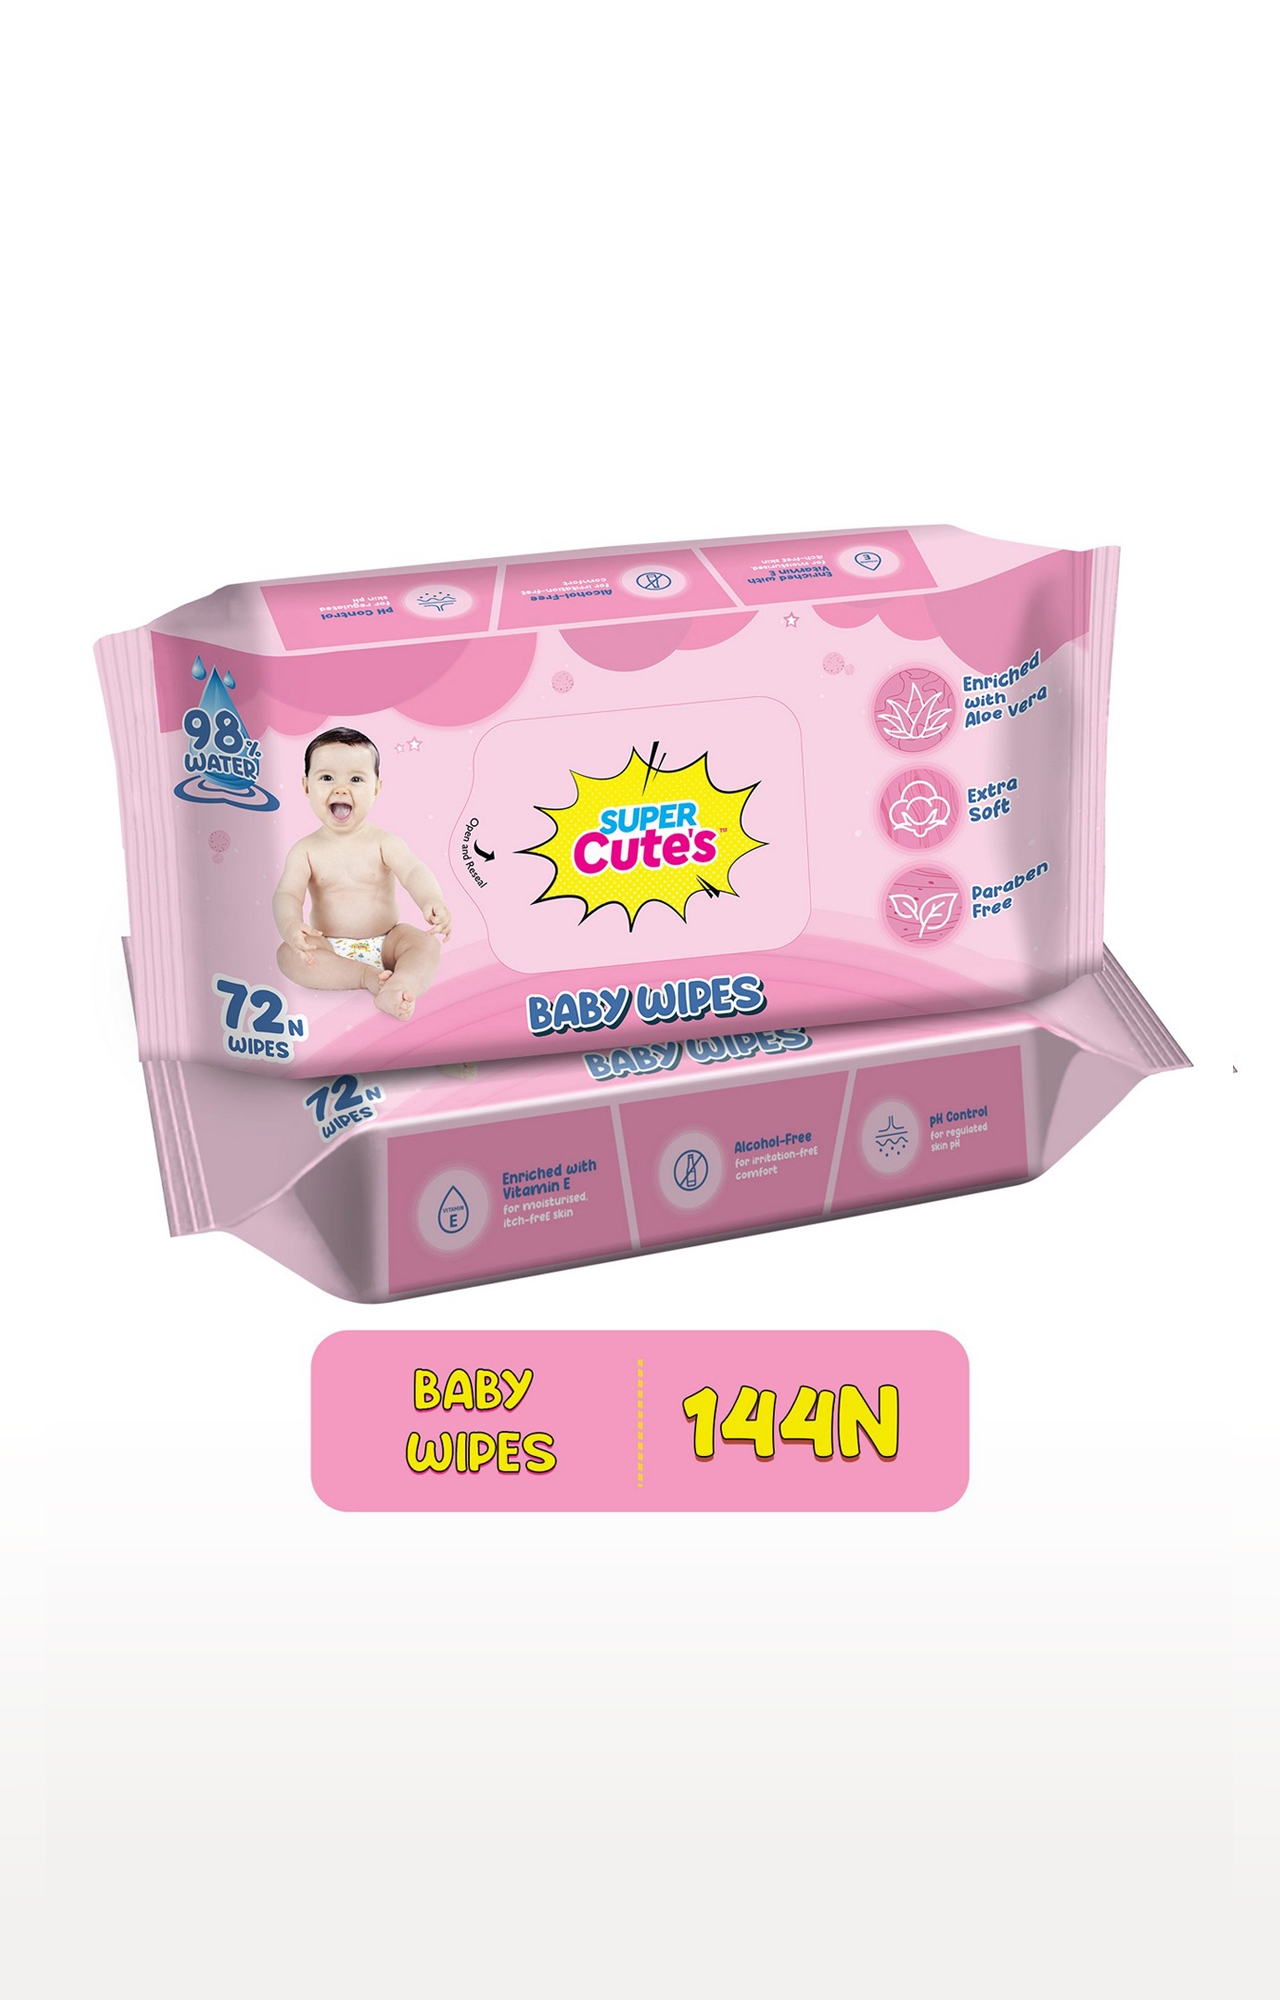 Super Cute's | Super Cute's Premium Soft Cleansing Baby Wipes With Aloe Vera, Enriched With Vitamin E, And Paraben Free - 72 Wipes (Combo Of 2)